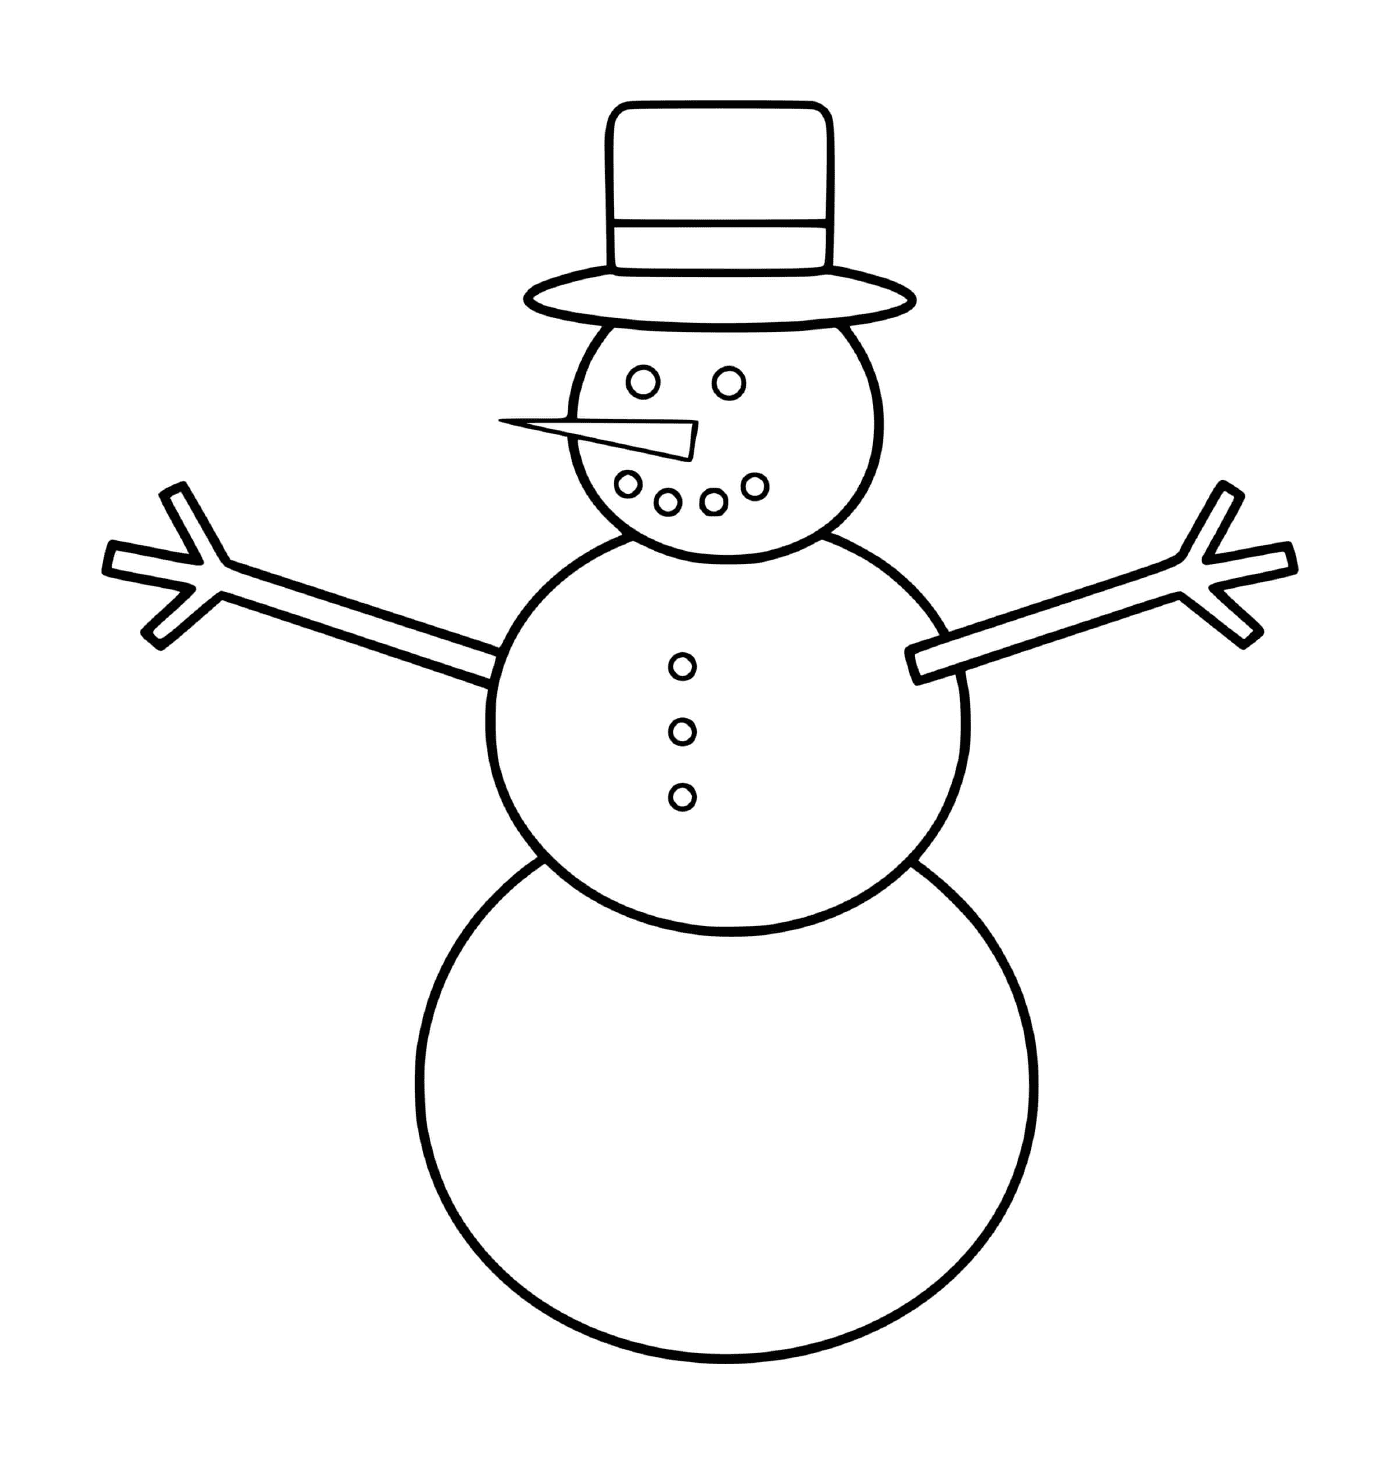  A classic snowman with two branches of wood 